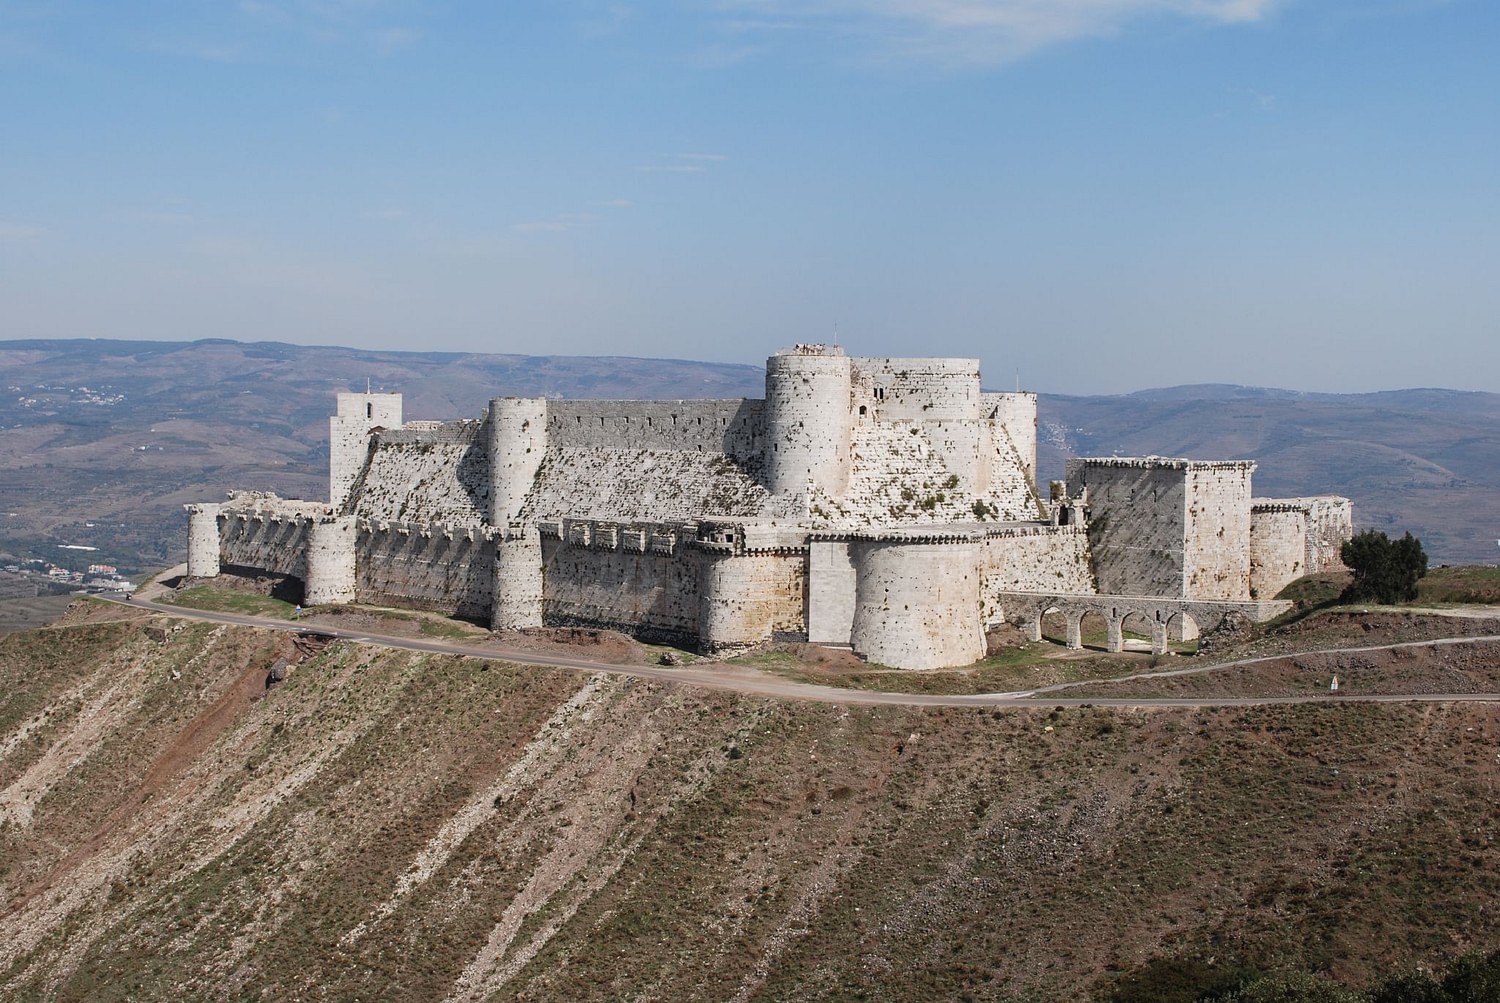 The Fortress of Saladin, State of War: Syria's Crusader Castles and  Medieval Fortresses